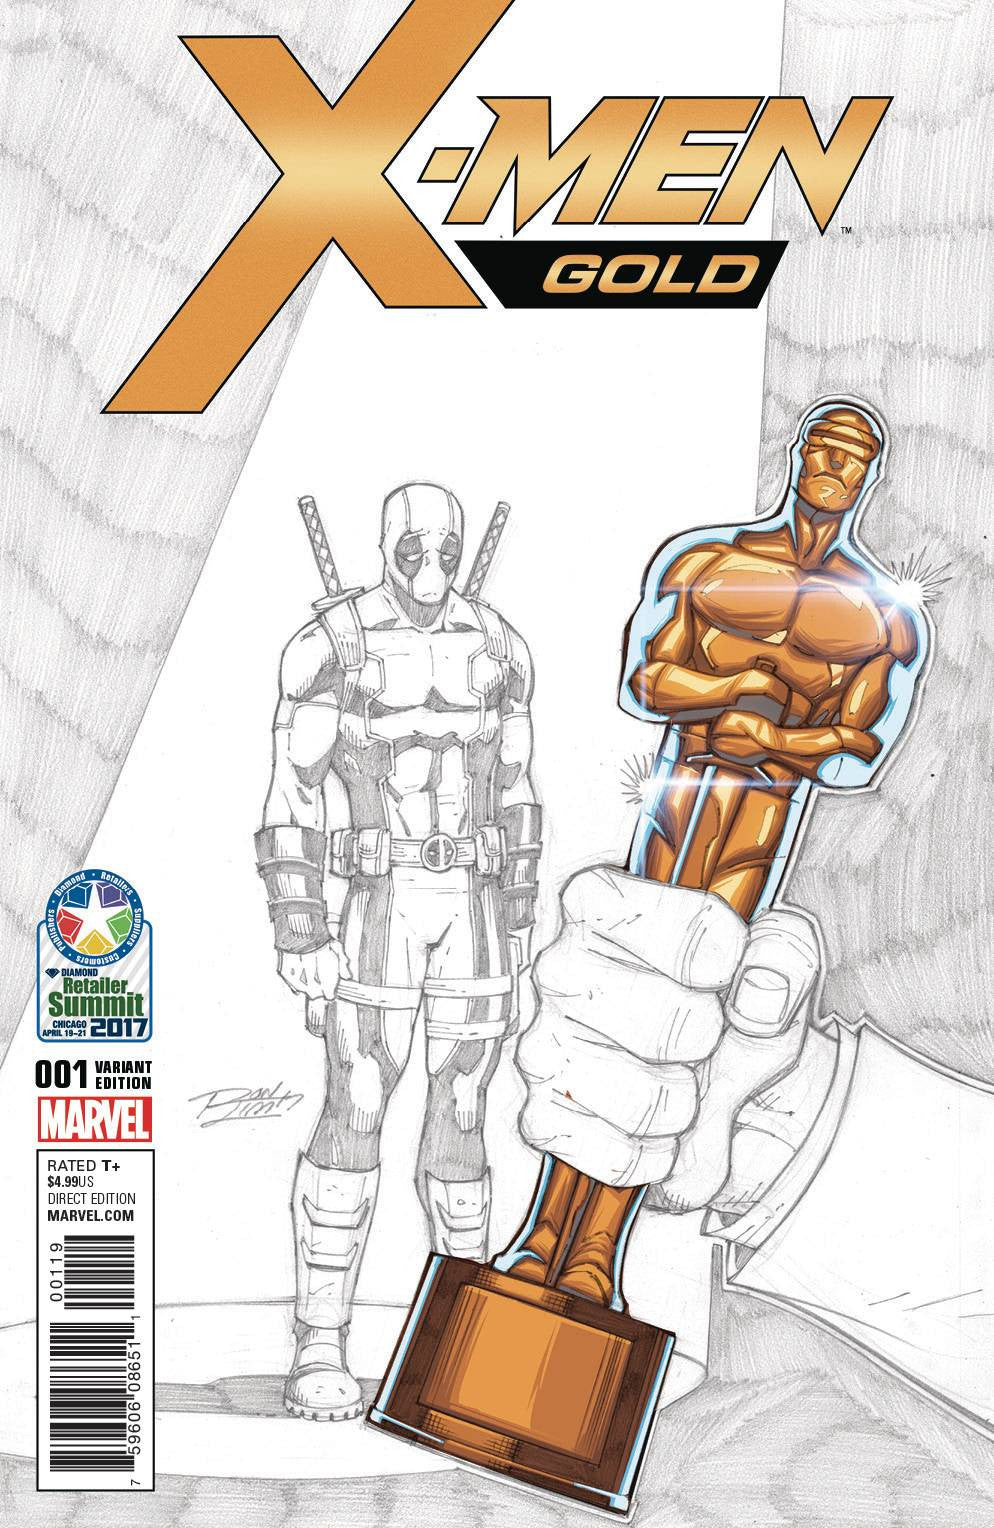 Top 10 Comics 5th - 11th April - Going For Gold